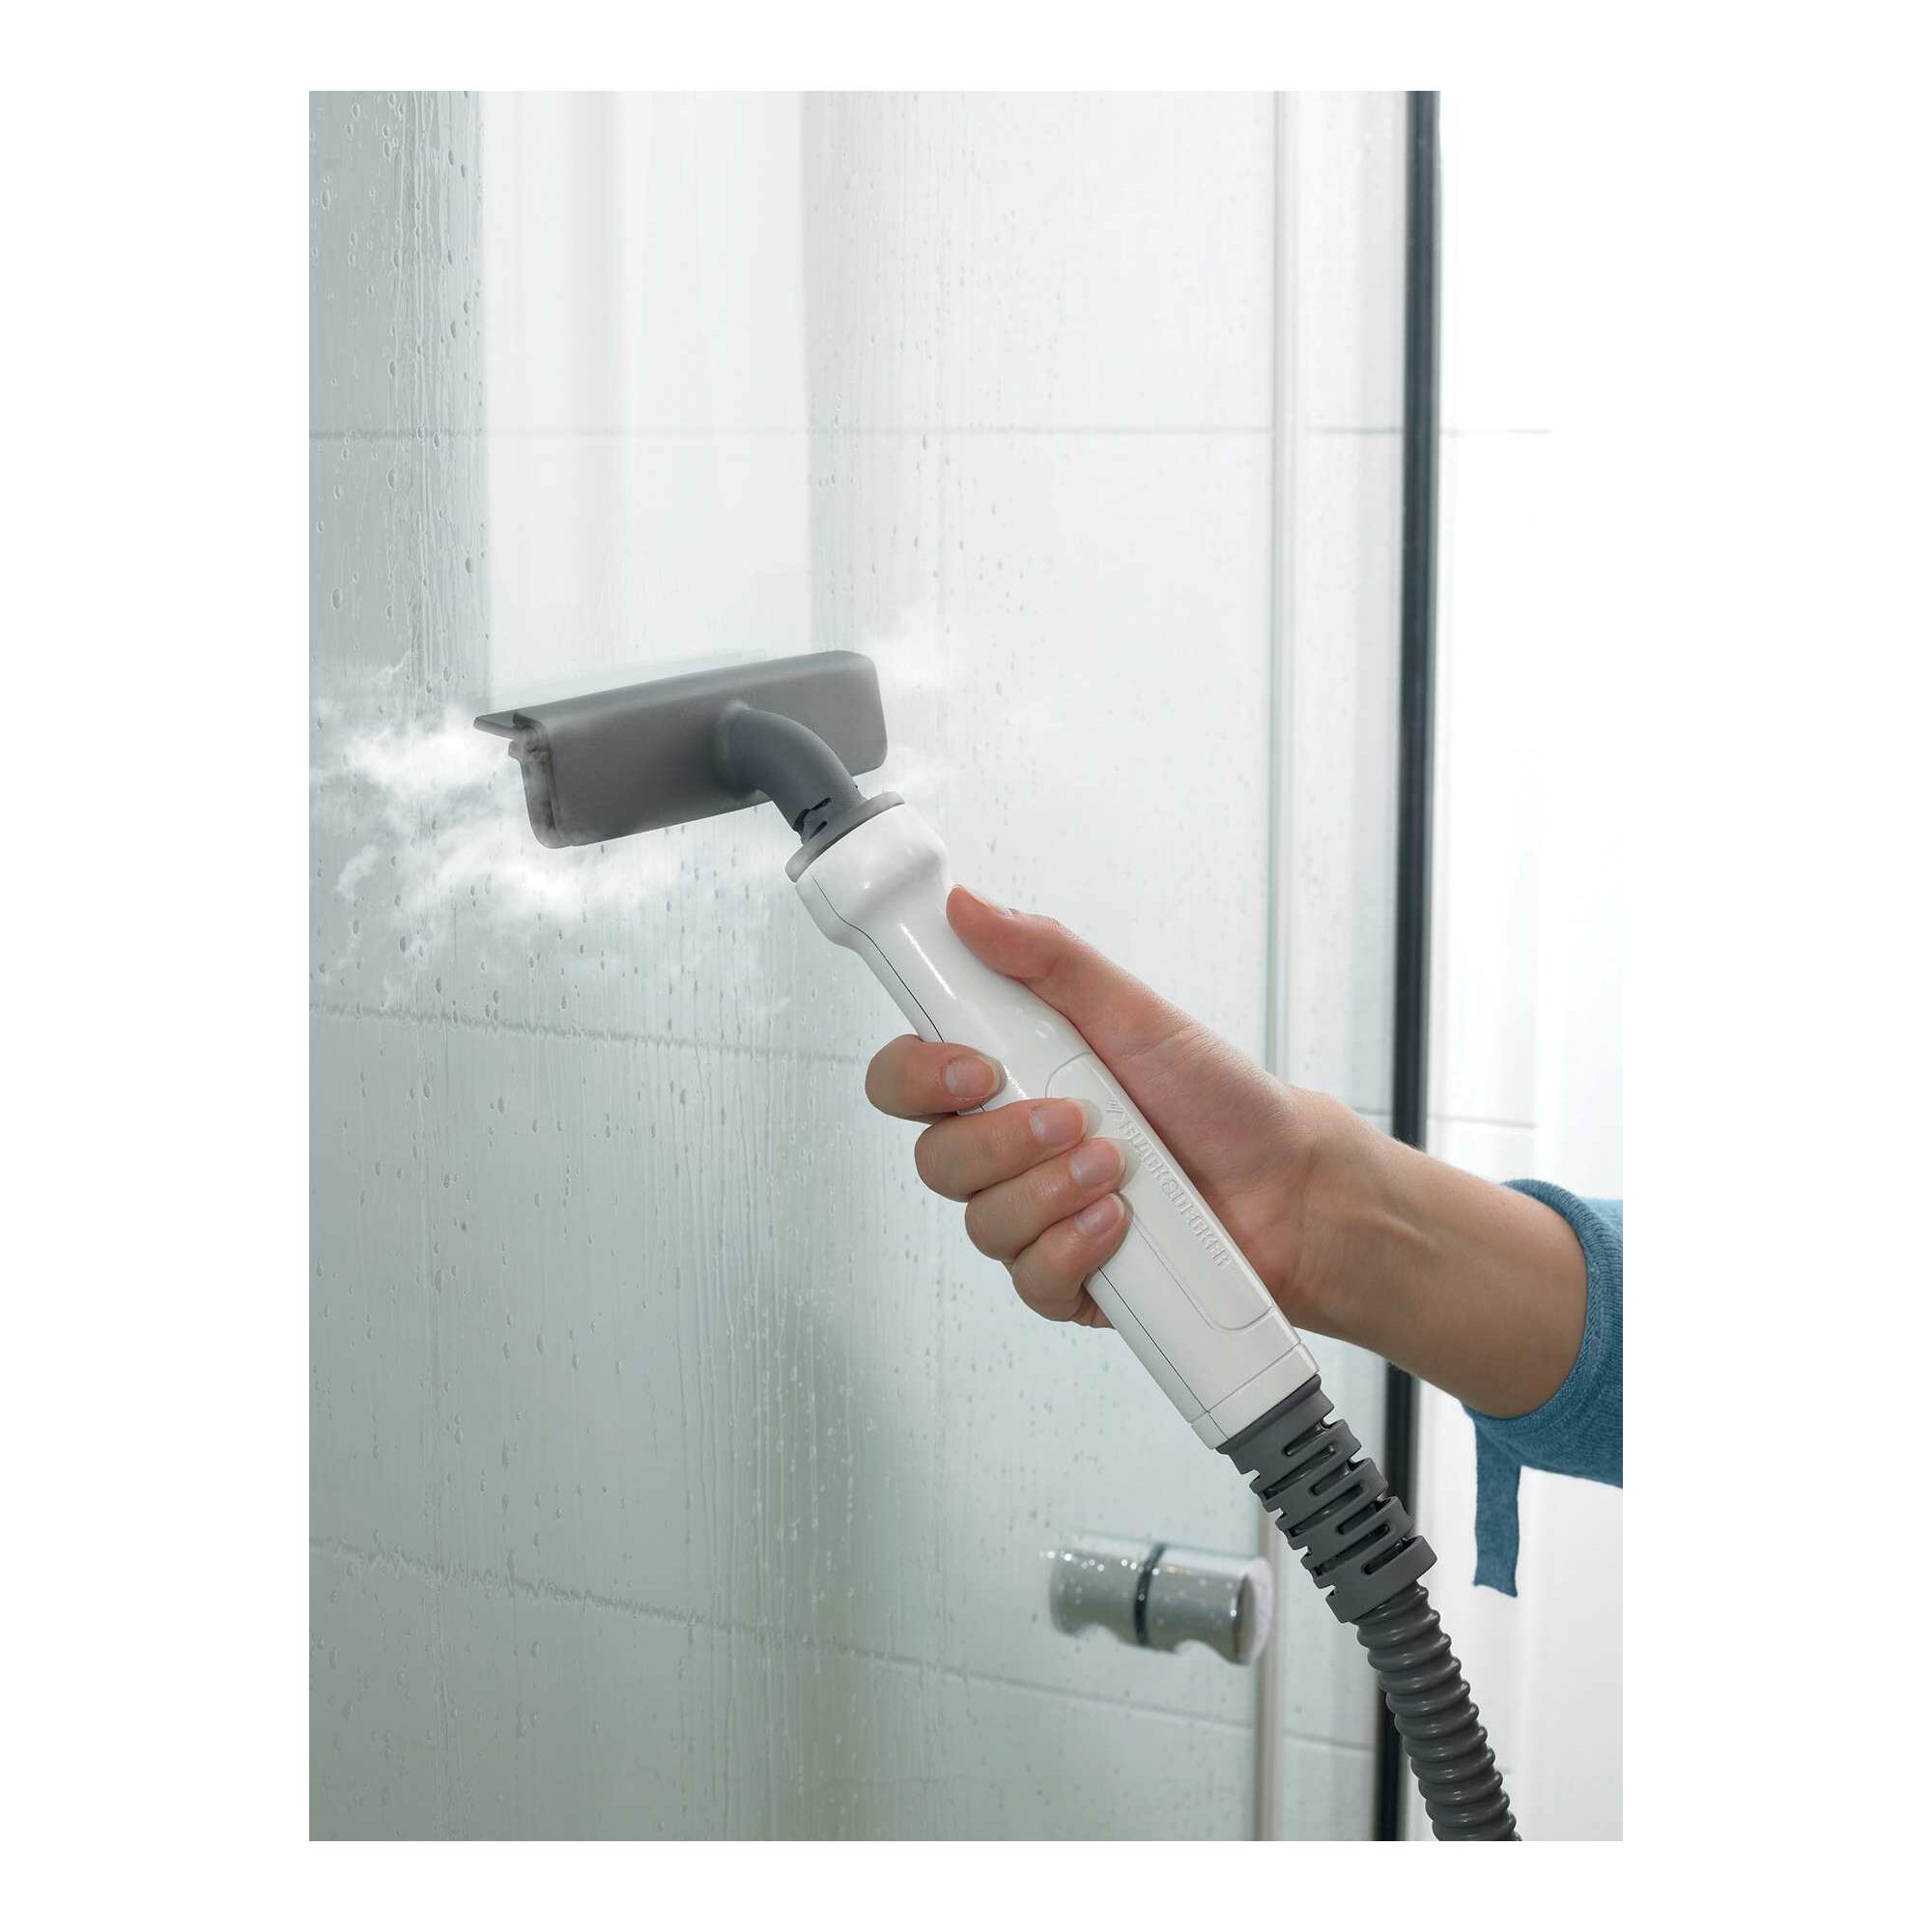 5 in 1 steam mop and portable steamer being used to steam glass doors.